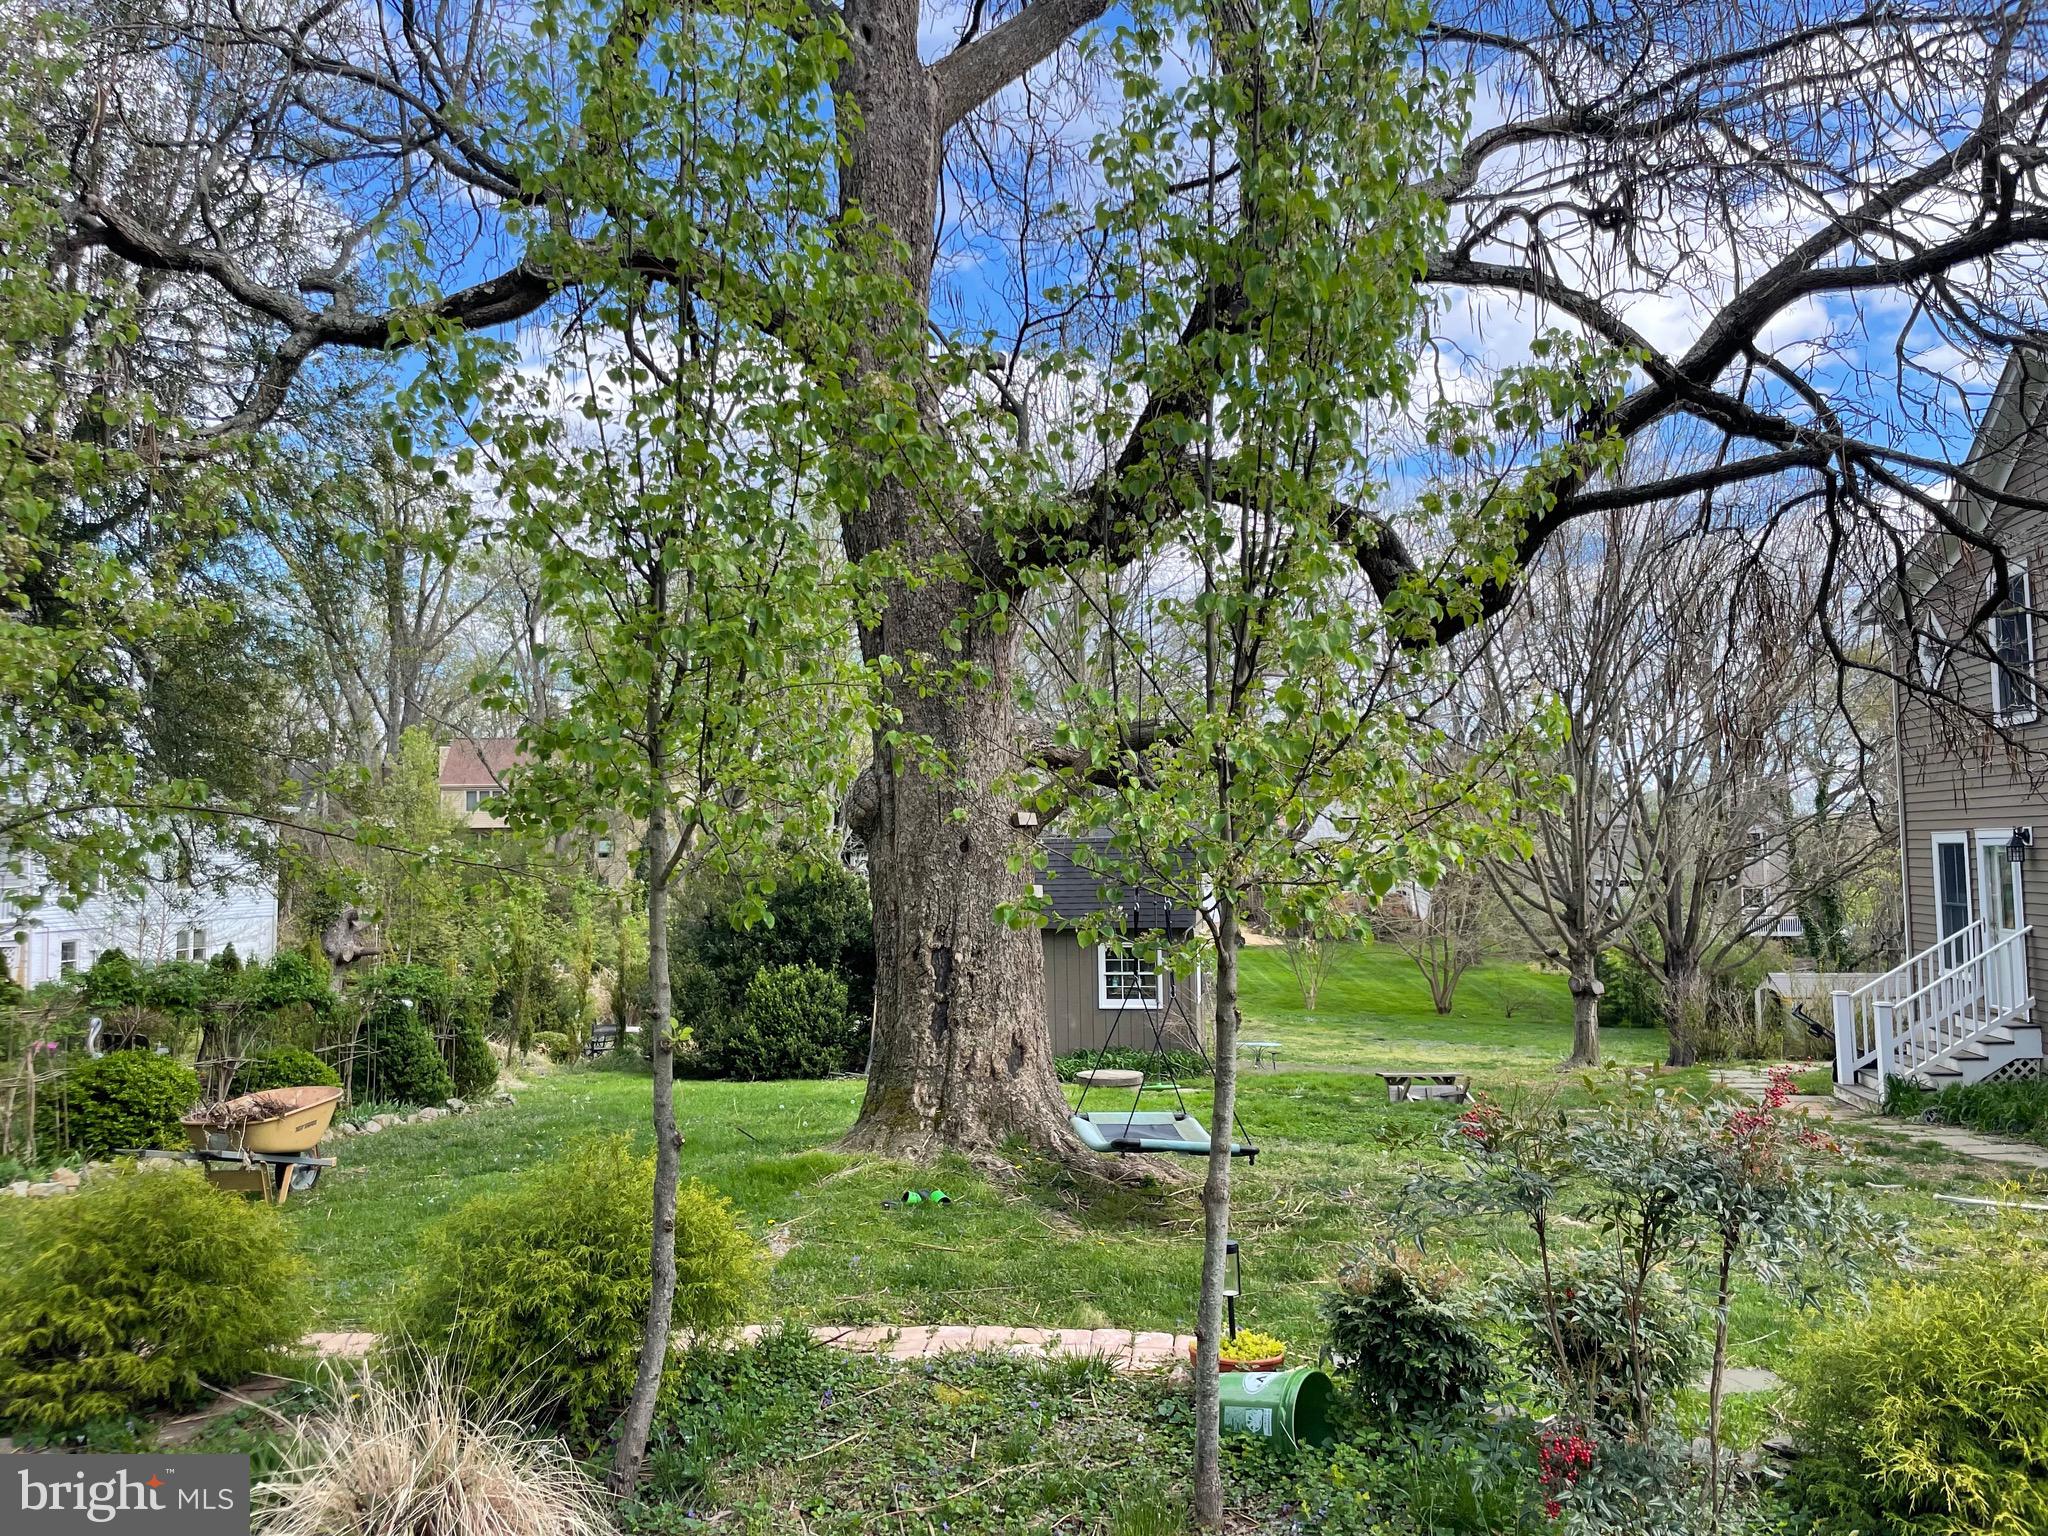 a view of a garden with a tree